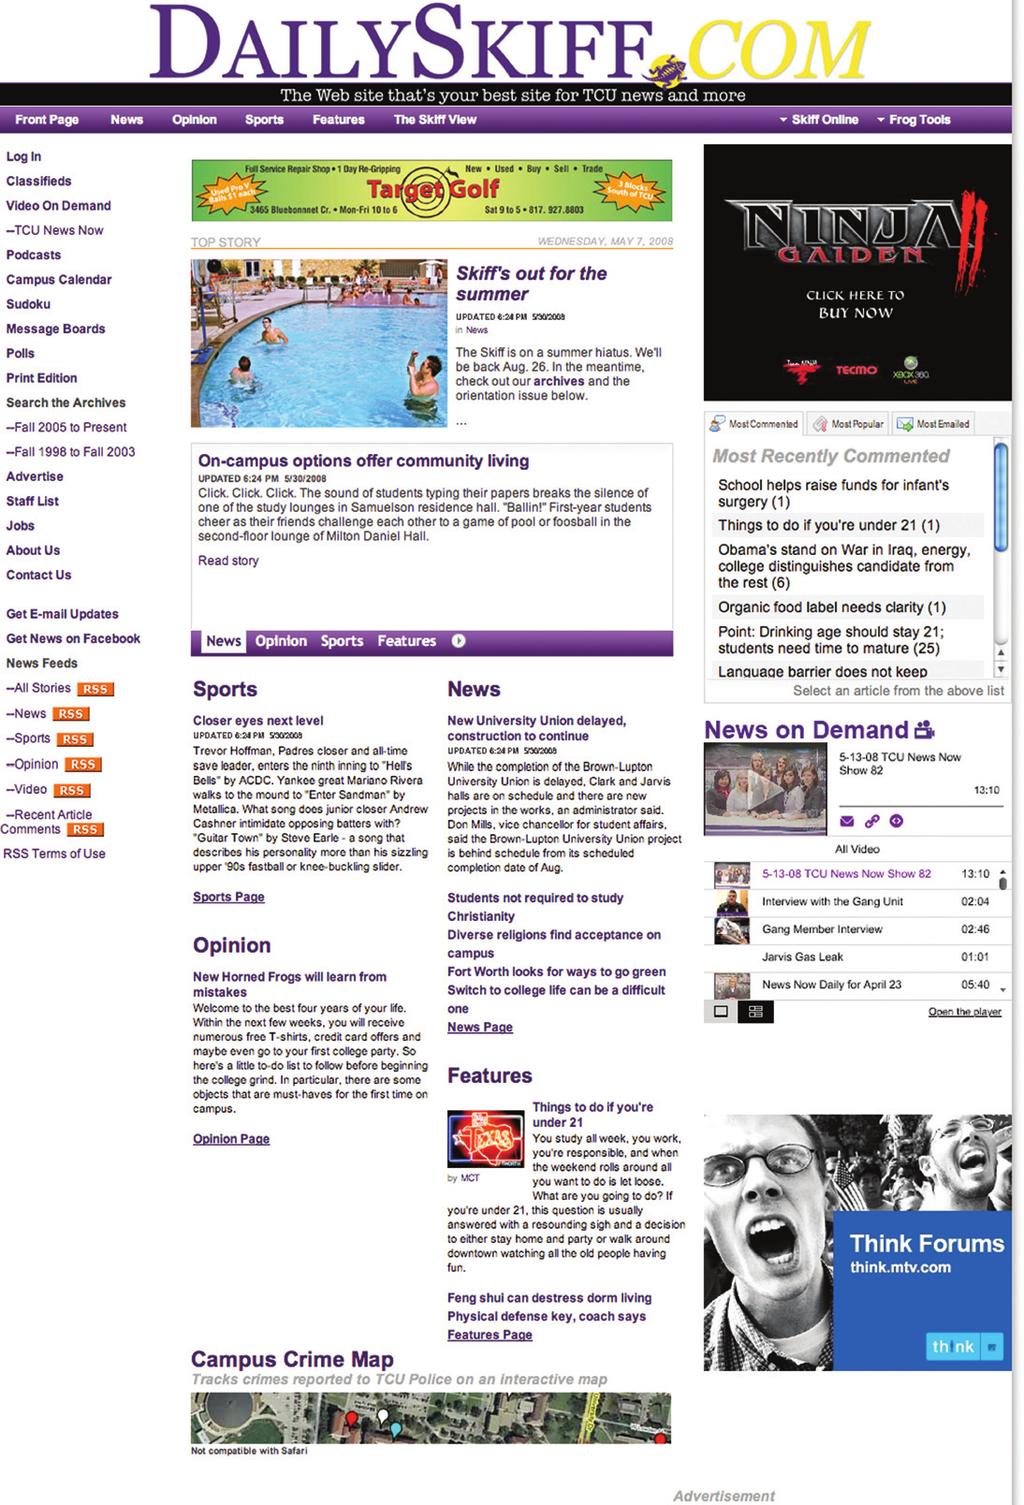 Online Advertising Advertising on DailySkiff.com expands your reach to the TCU community.